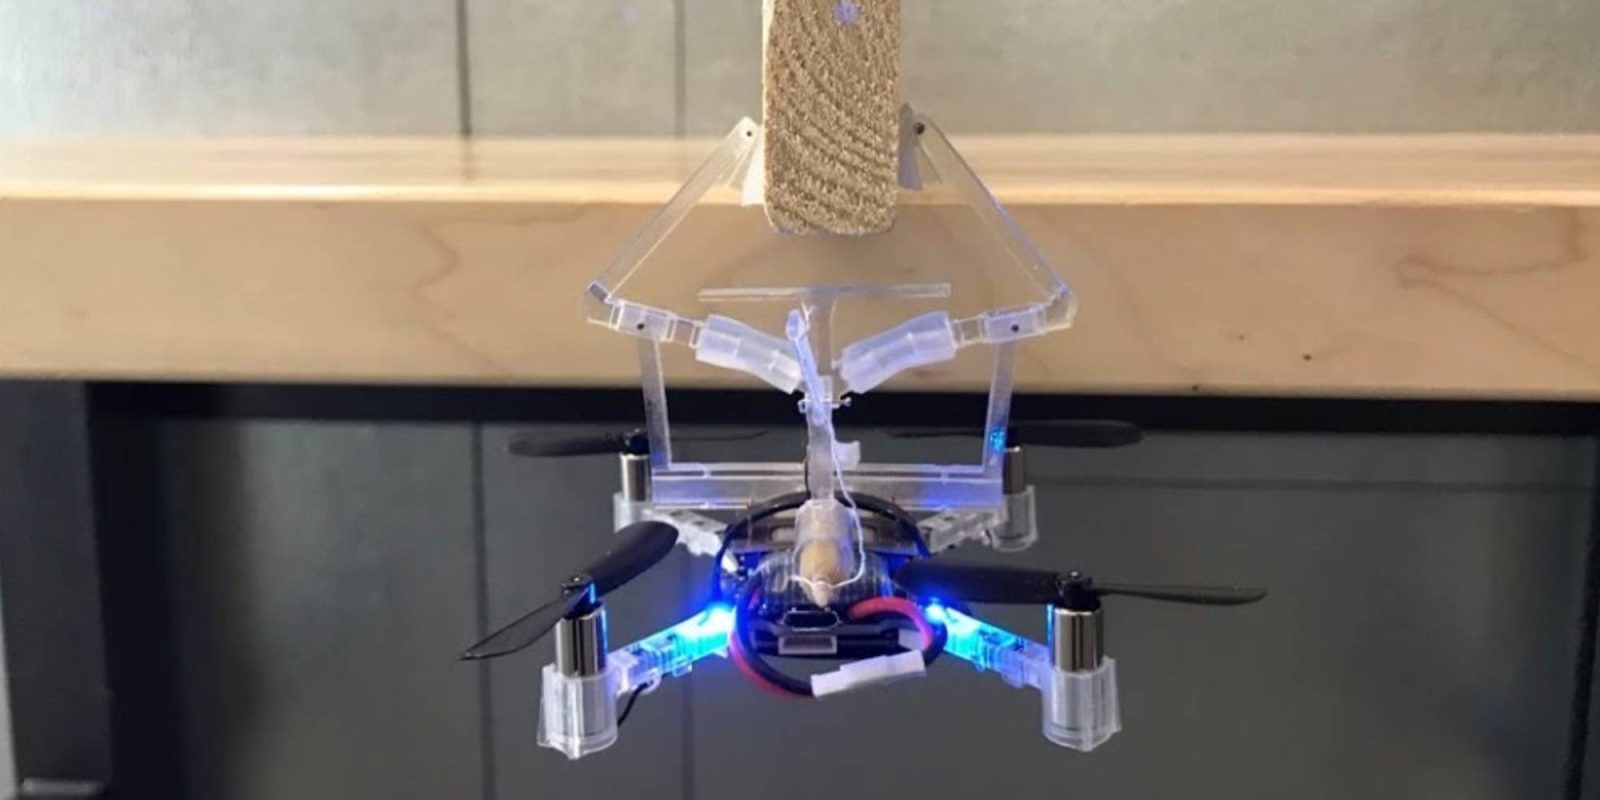 https://dronedj.com/wp-content/uploads/sites/2/2020/12/drone-hang-objects-mechanical-gripper.jpg?quality=82&strip=all&w=1600